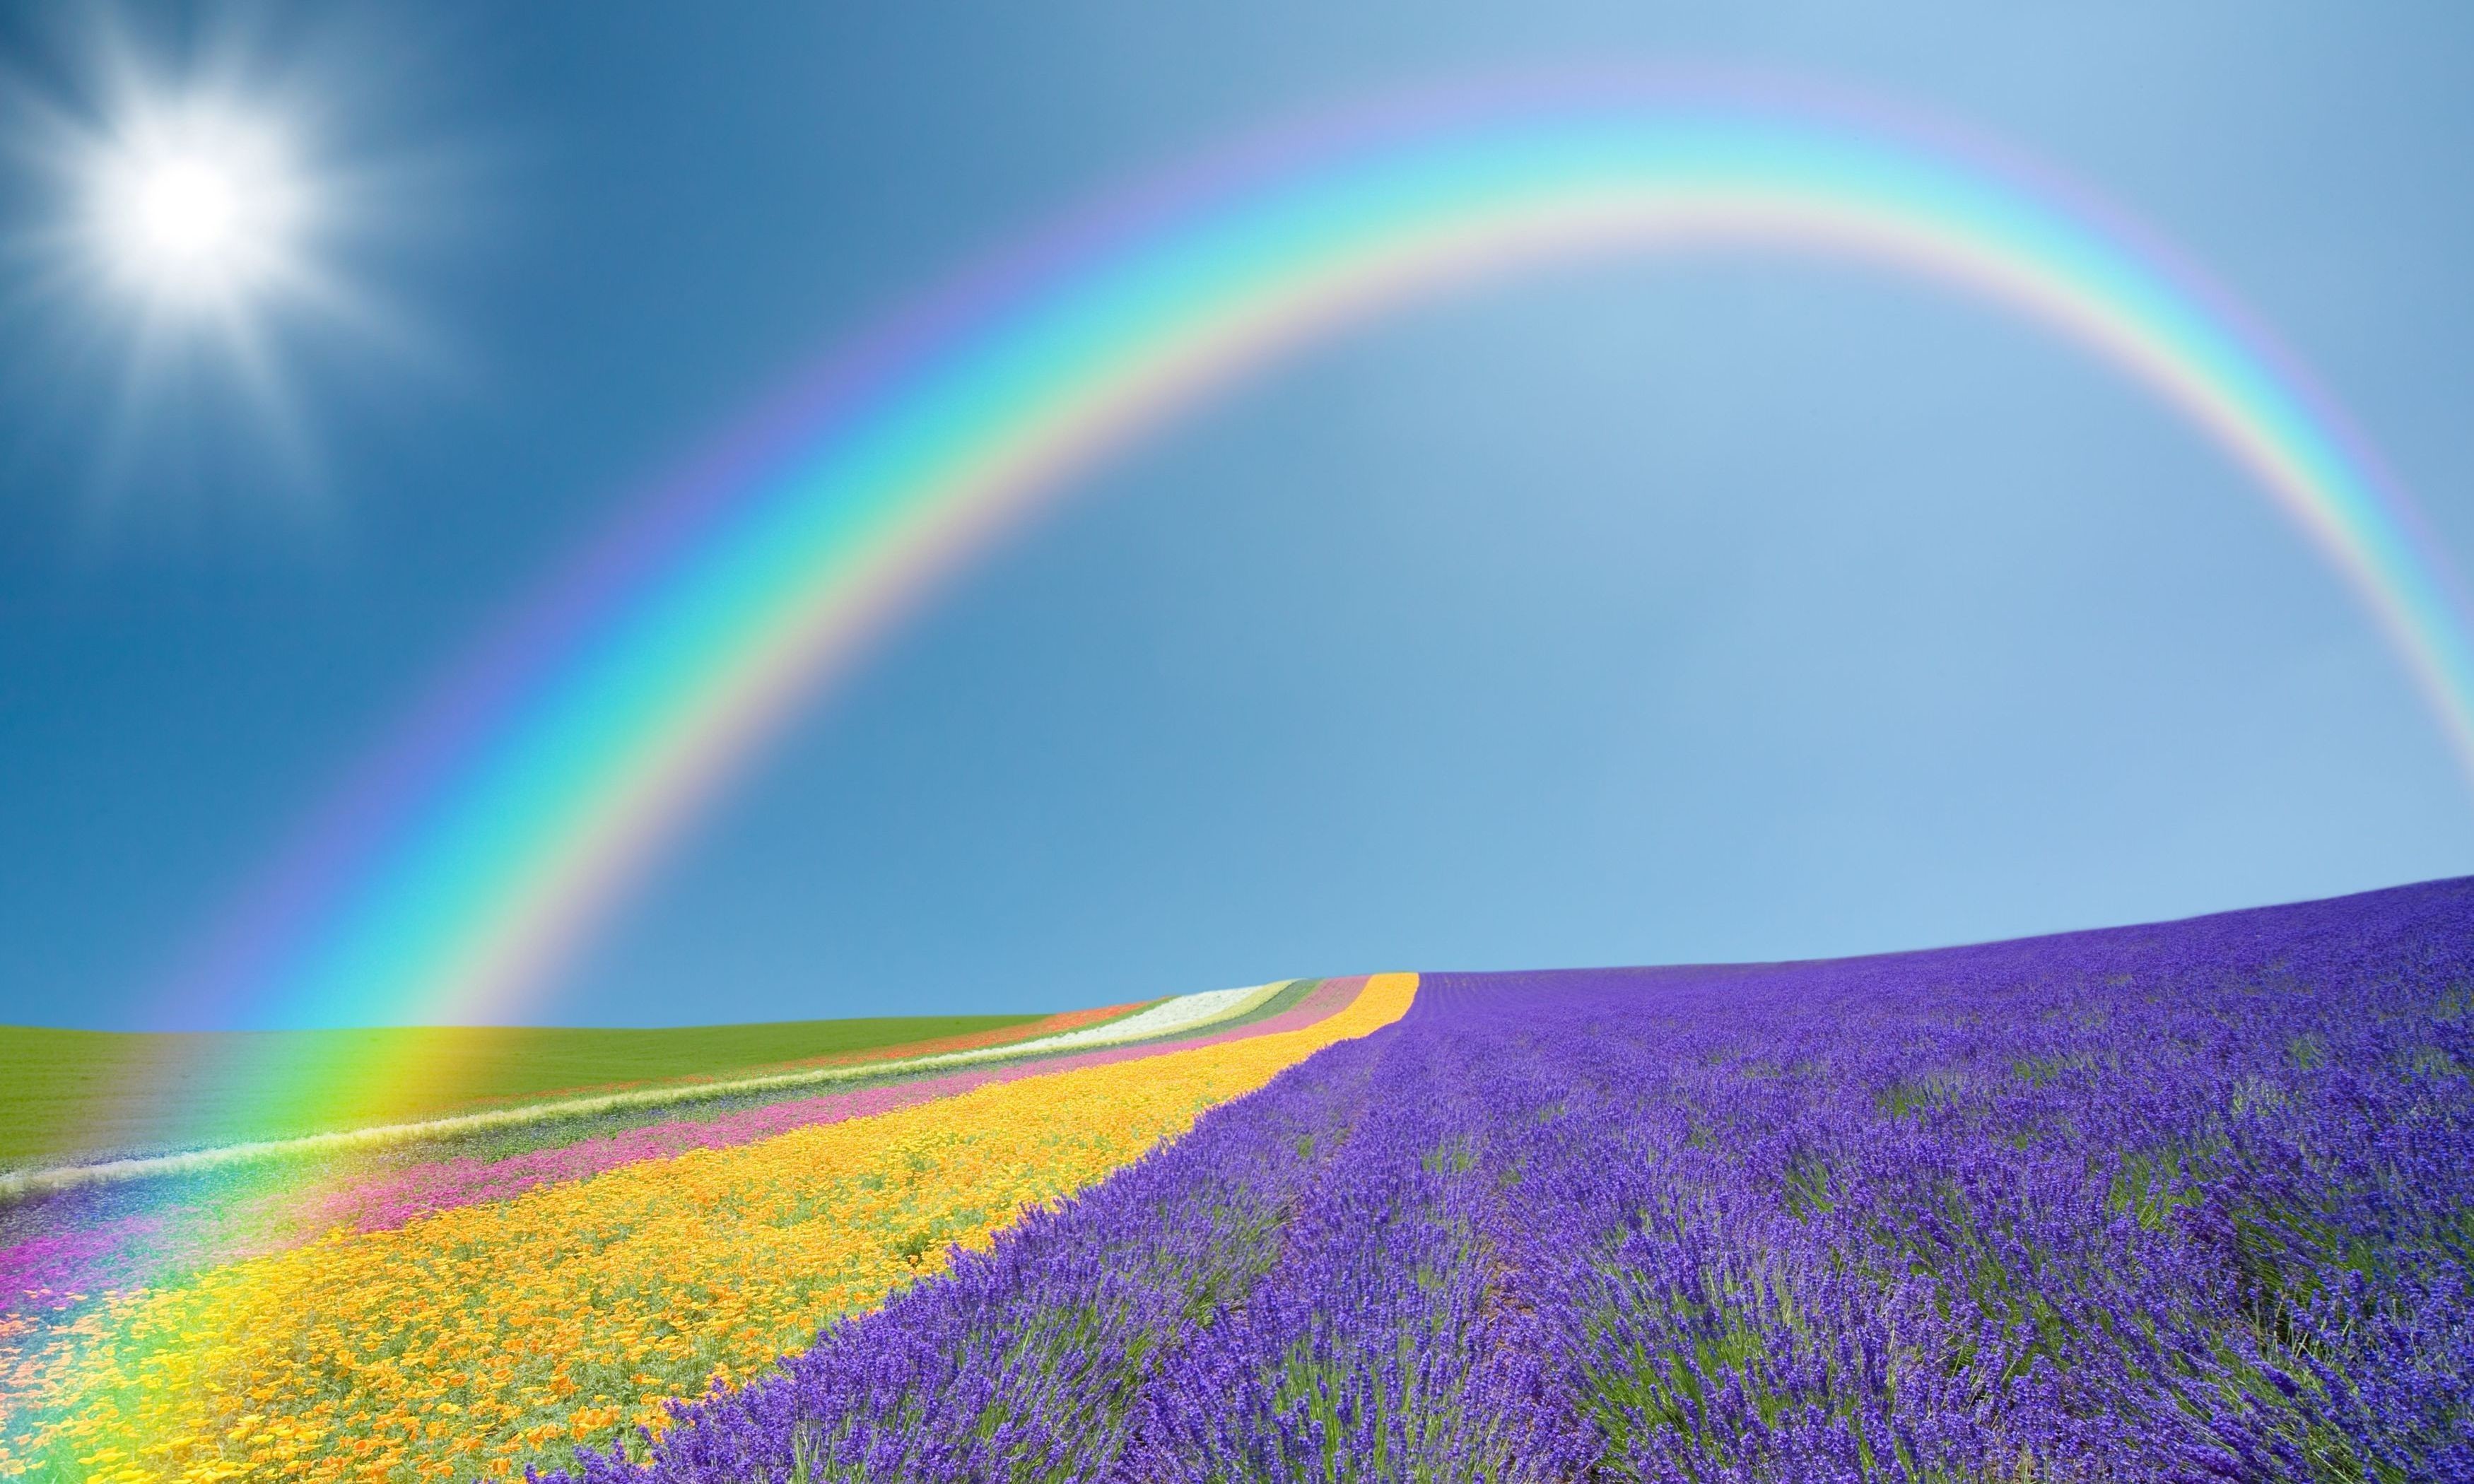 3500x2100 Field Of Yellow Flowers Wallpaper Lavender Flowers Field With Rainbow  Wallpapers